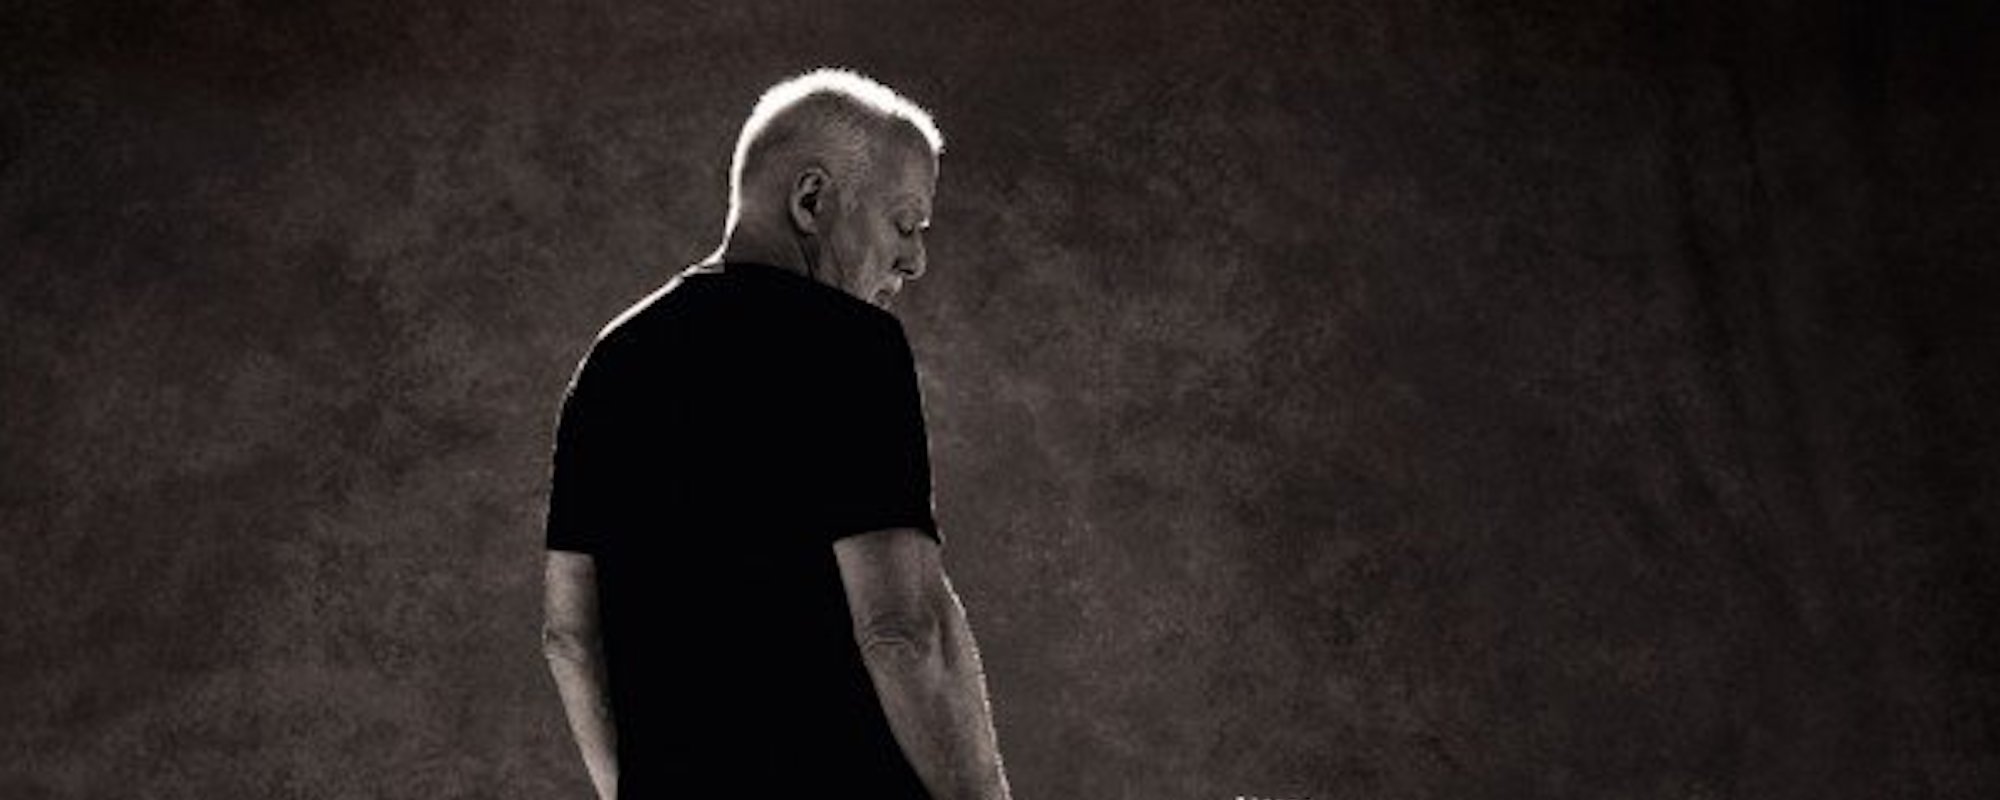 Pink Floyd’s David Gilmour to Russian Soldiers: “Stop Killing Your Brothers”